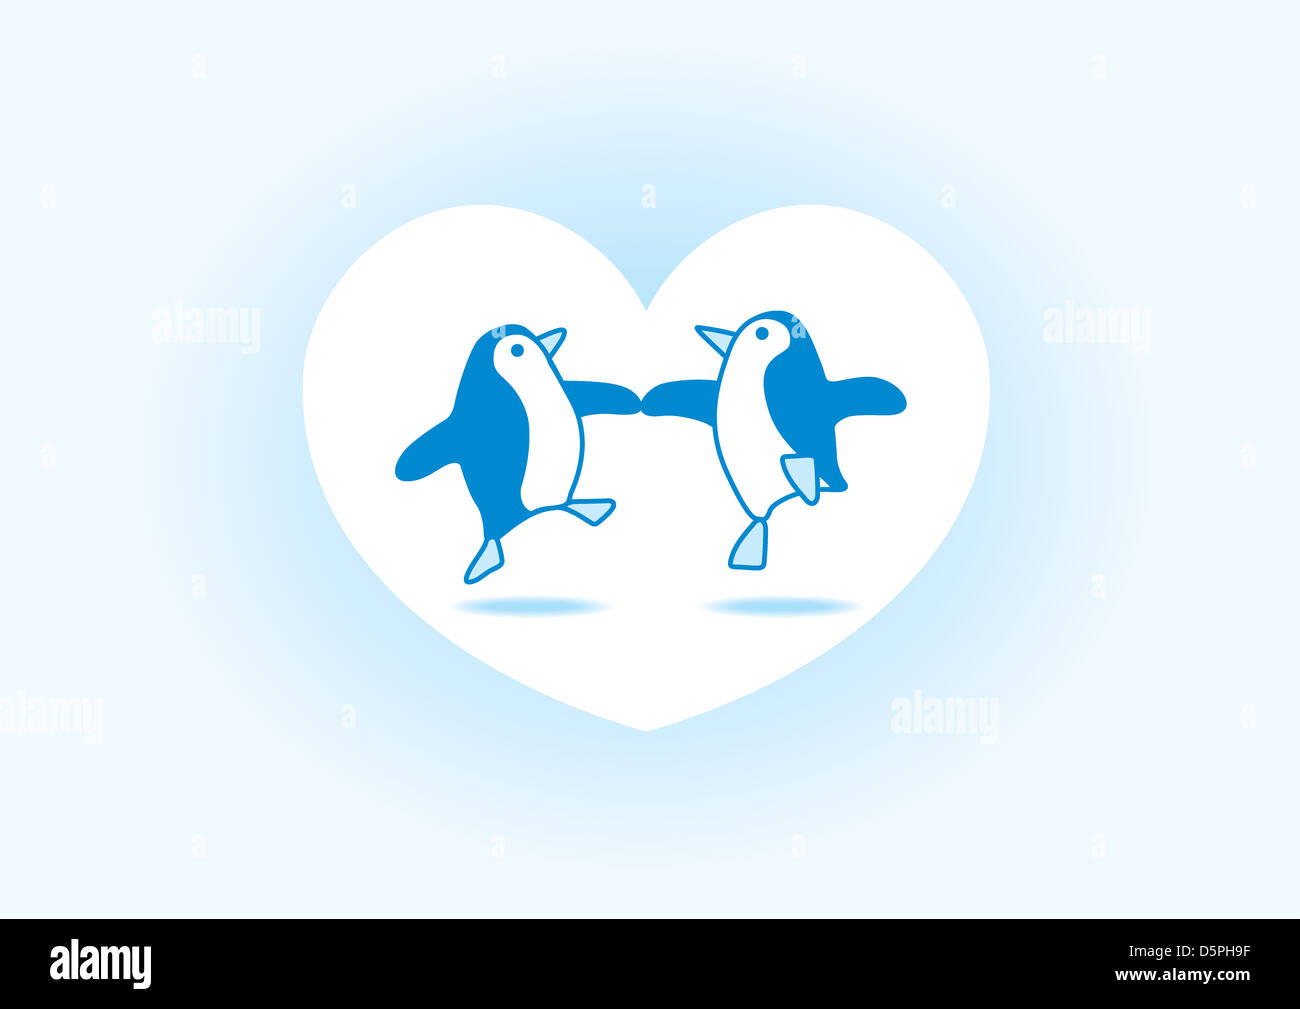 Two Happy Blue Penguins Dancing in a White Heart on a Soft Blue Background Stock Photo